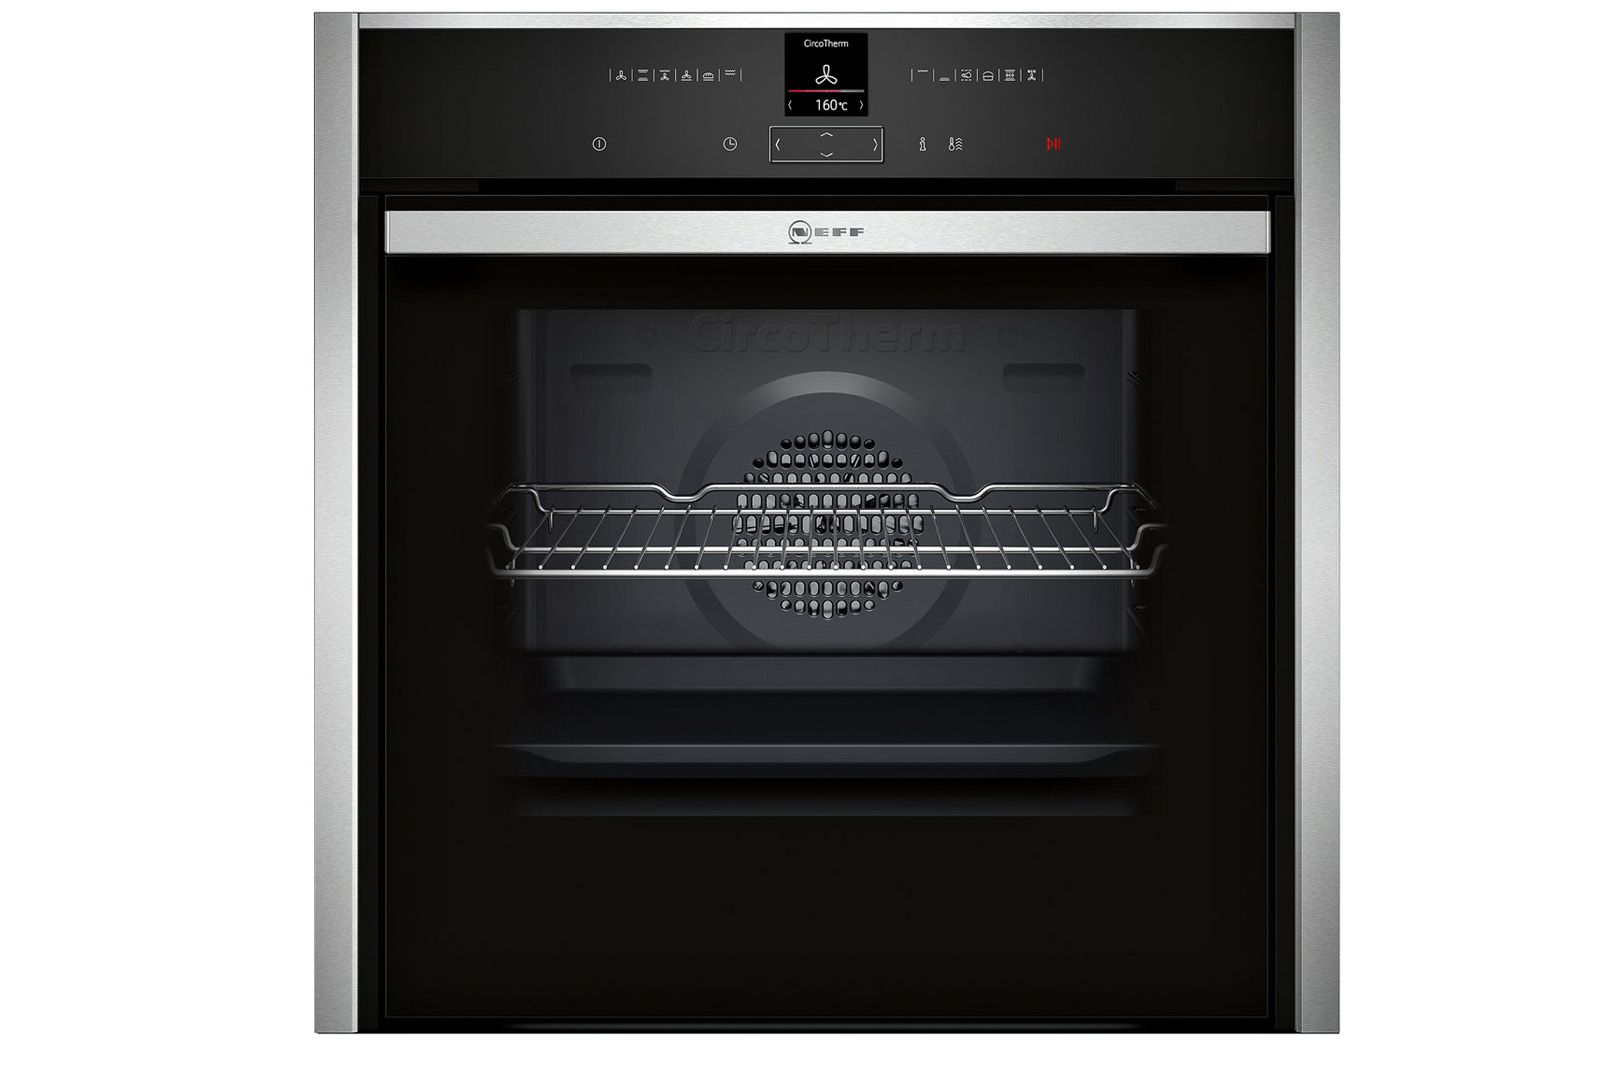 Best Smart Ovens The Technology Changing The Way We Cook image 6